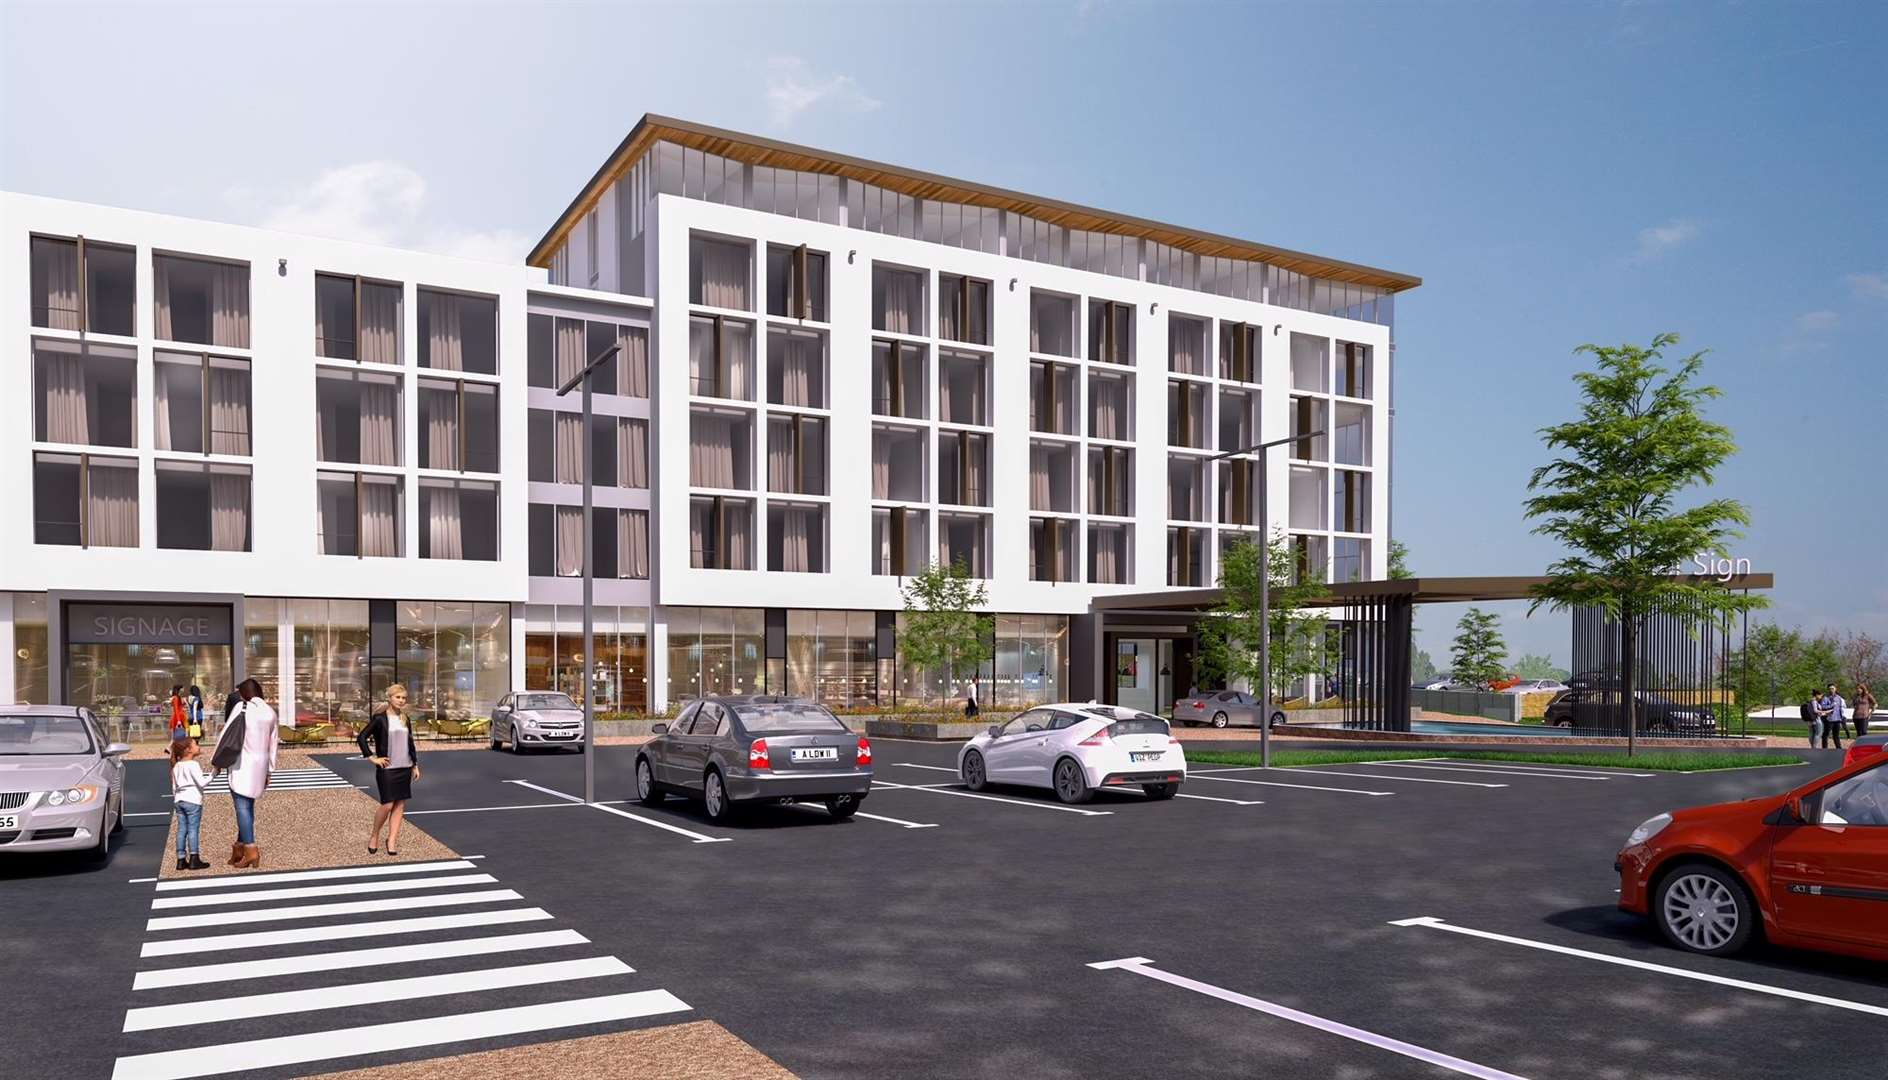 Artist impression of the Hampton by Hilton hotel on the old Silver Springs site